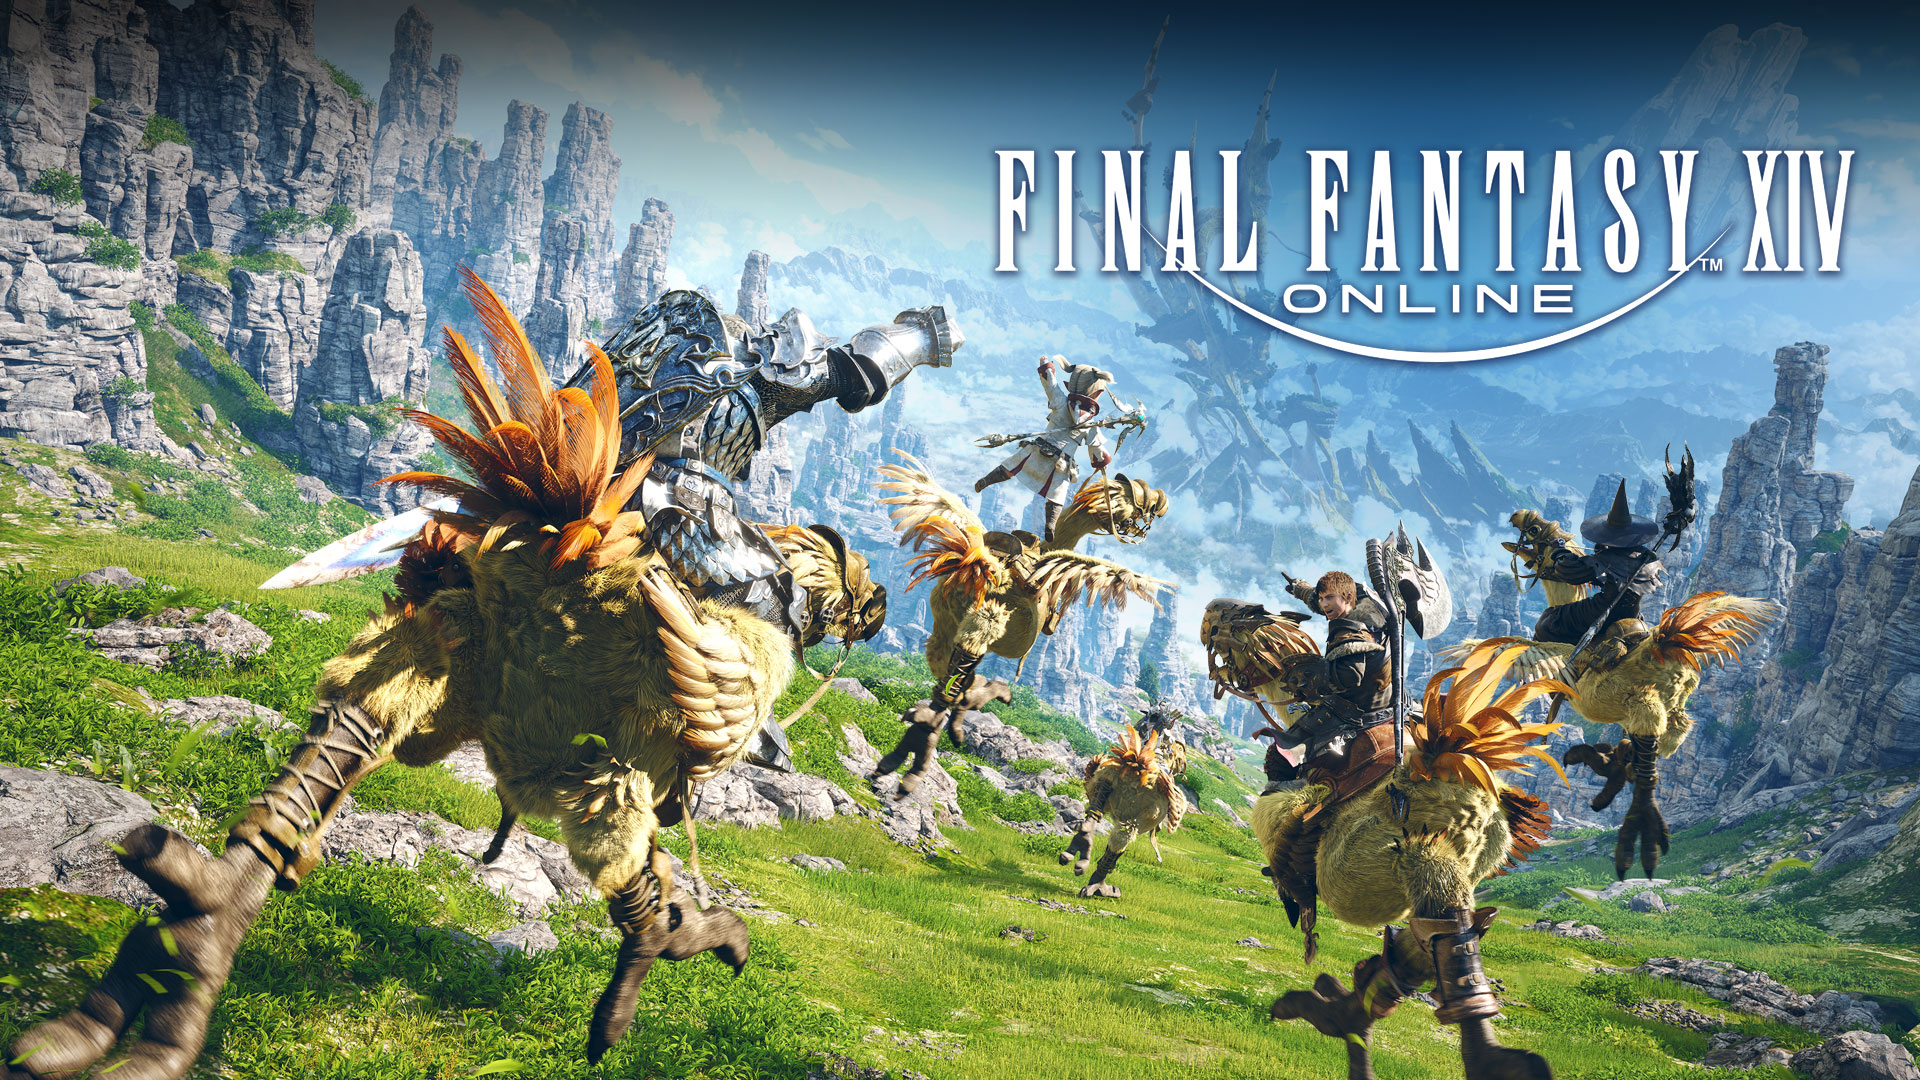 Guide: Experience The Thrill Of Battle In Final Fantasy XIV’s PvP Modes